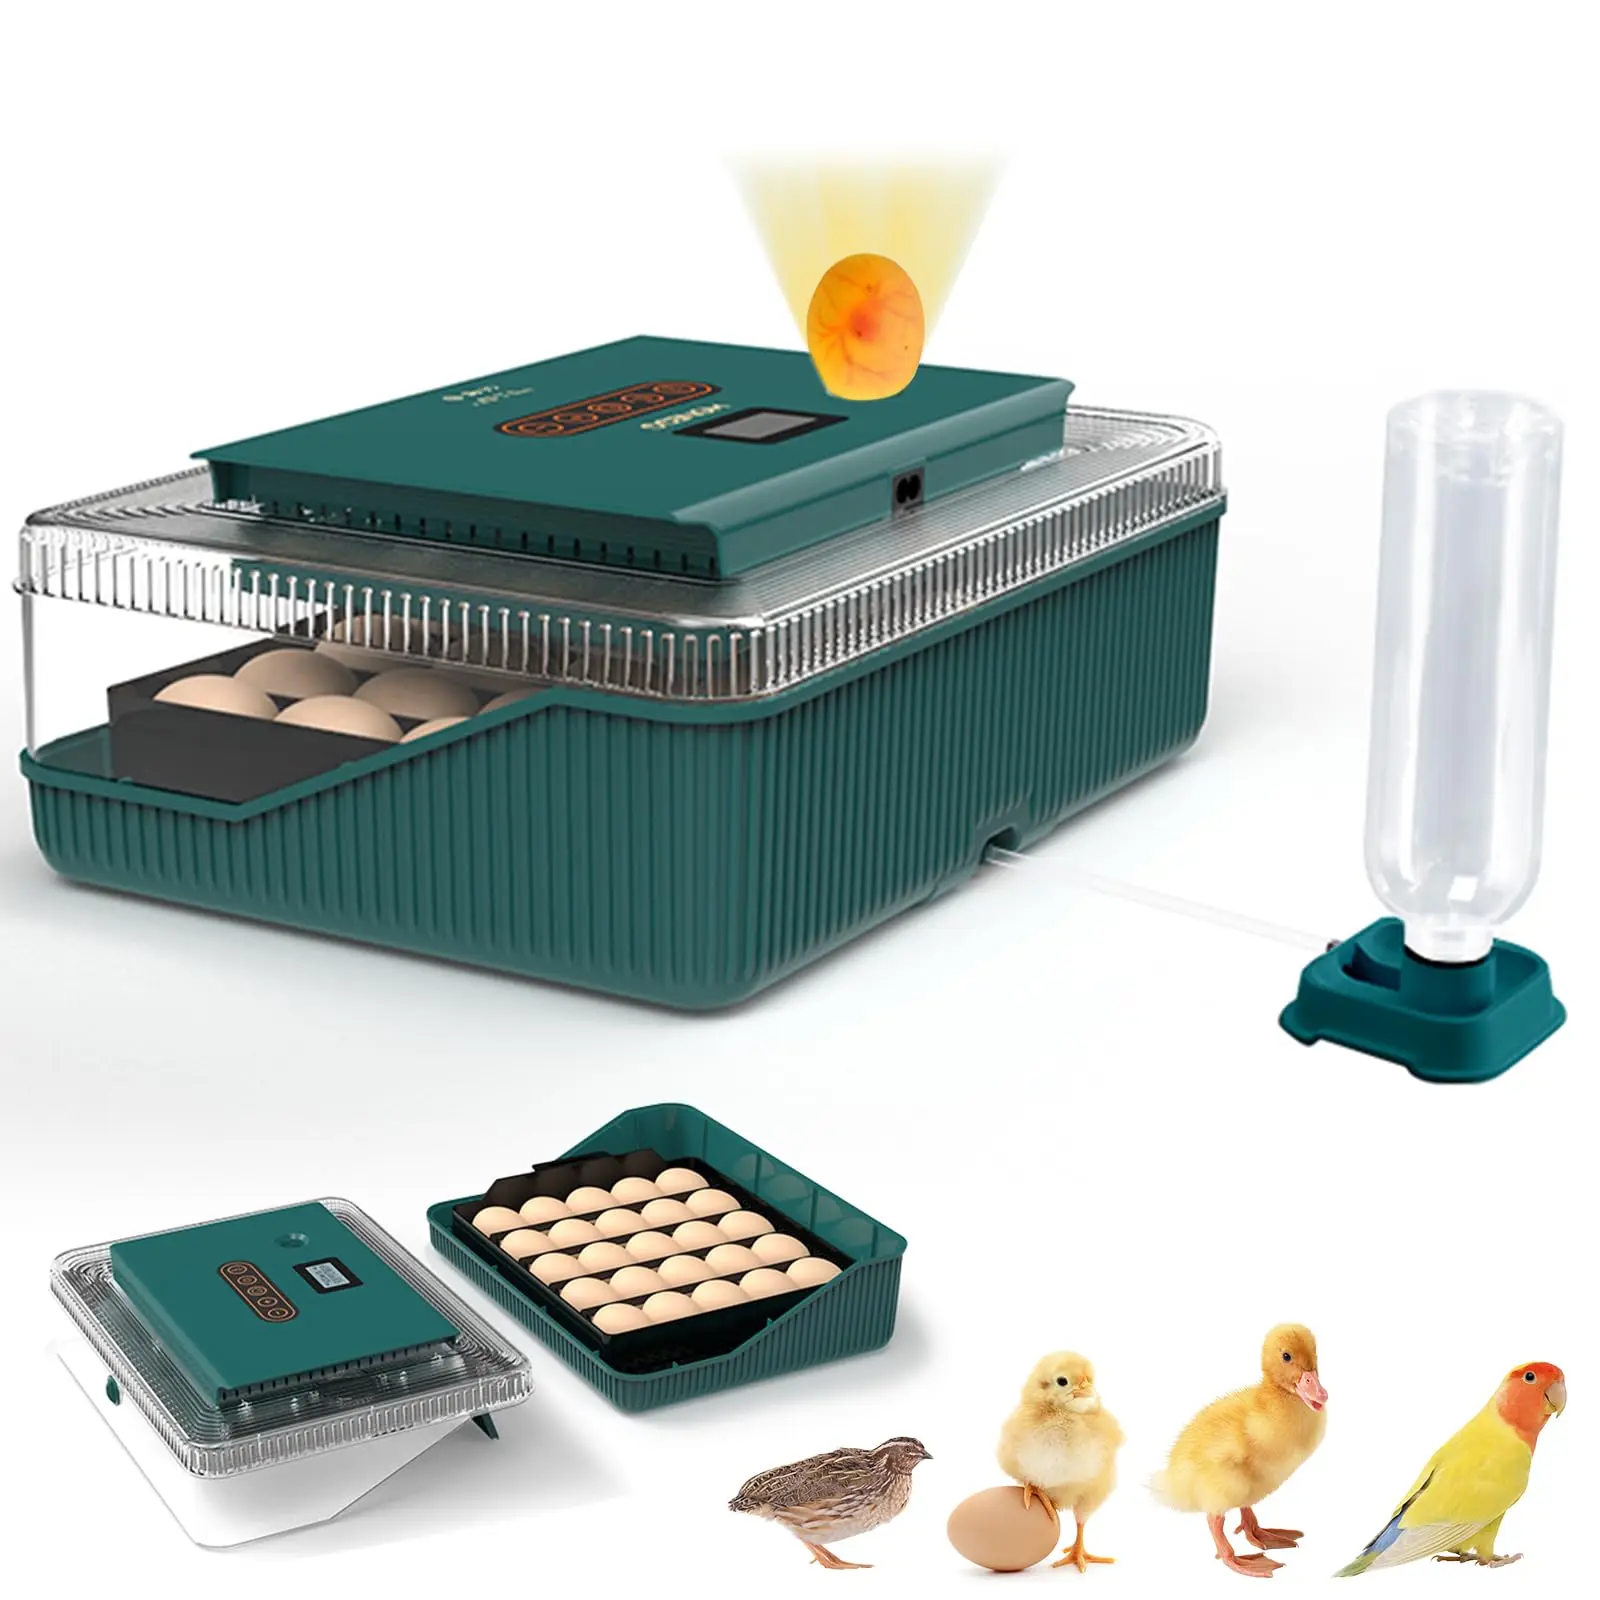 25-egg-incubator-for-hatching-chicks-with-automatic-egg-turner-pro-humidity-display-egg-candler-and-day-tractor-for-chicken